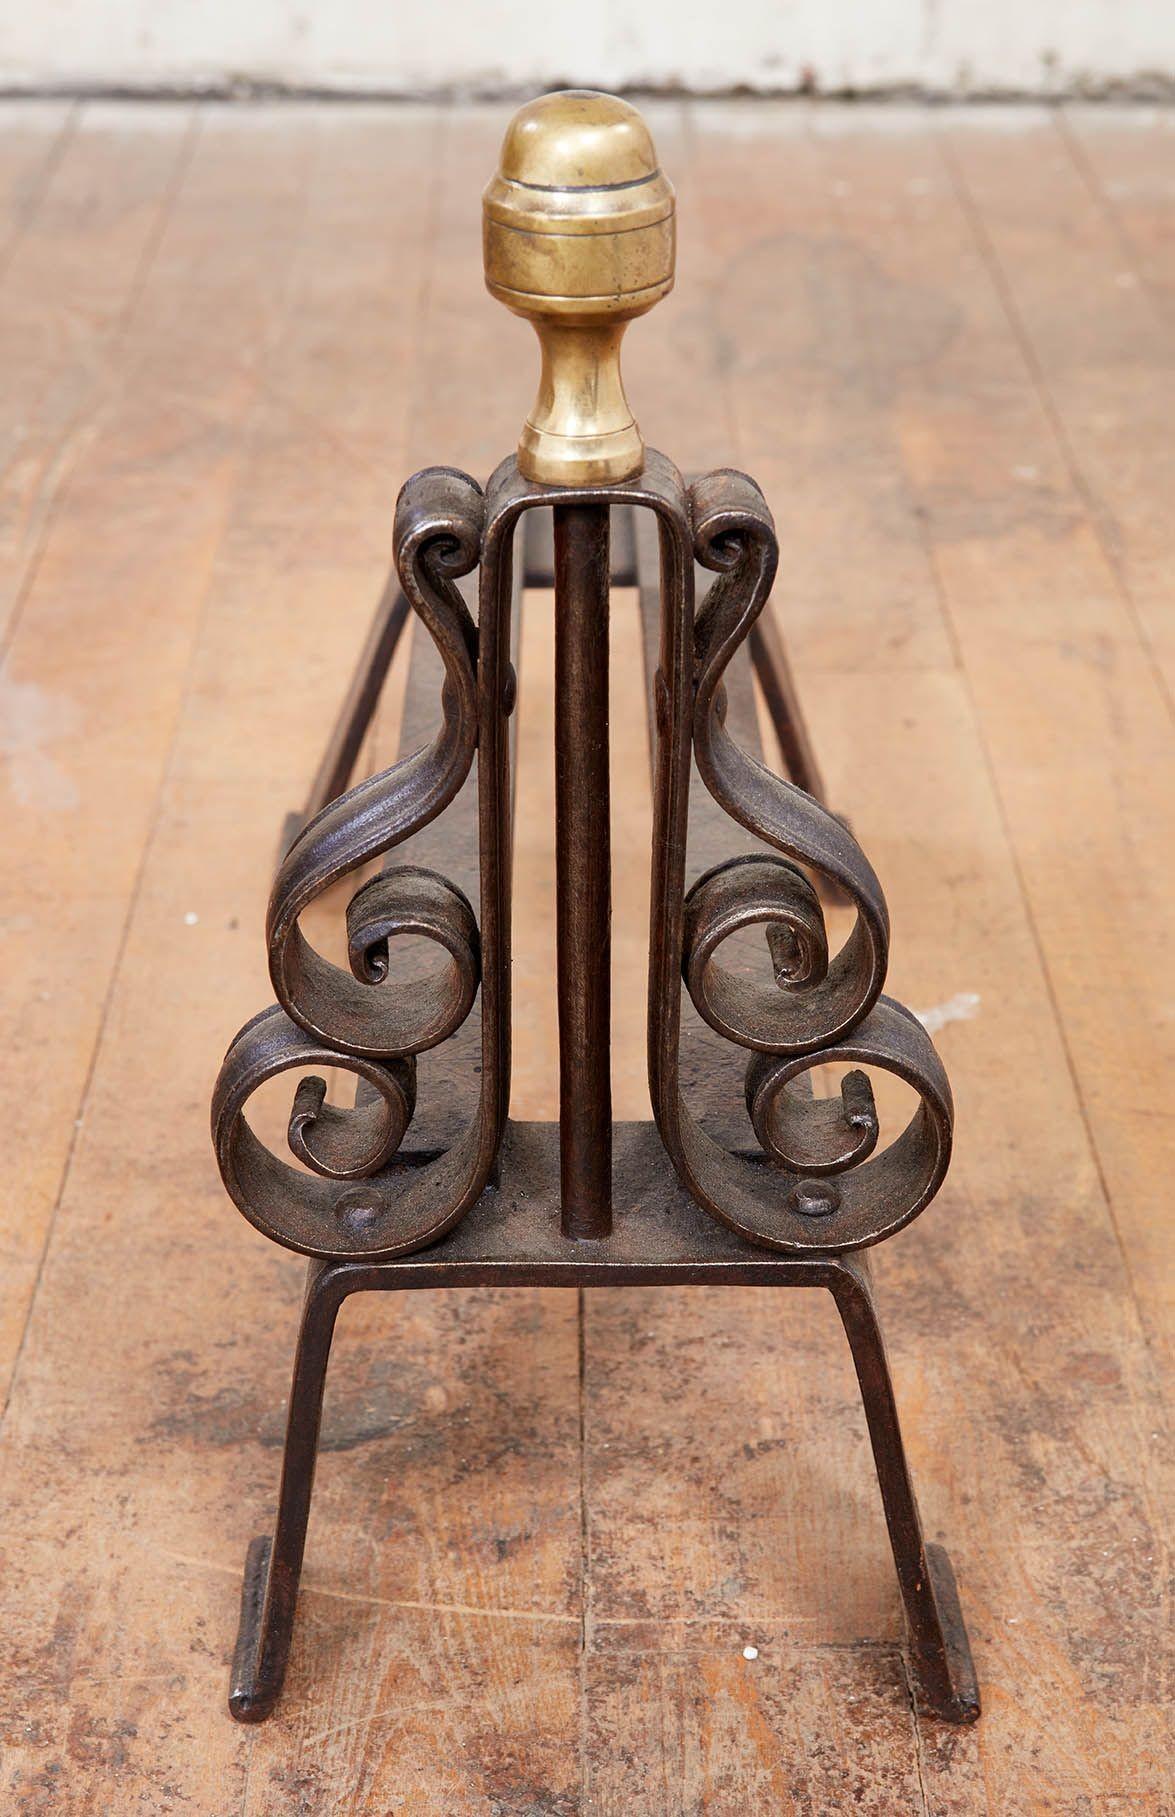 A finely-crafted pair of andirons with lyre shaped bodies in scrolled iron surmounted by a turned brass finial, the whole on two sets of inverted U strap legs joined by double rails incised with decorative line and dot markings.